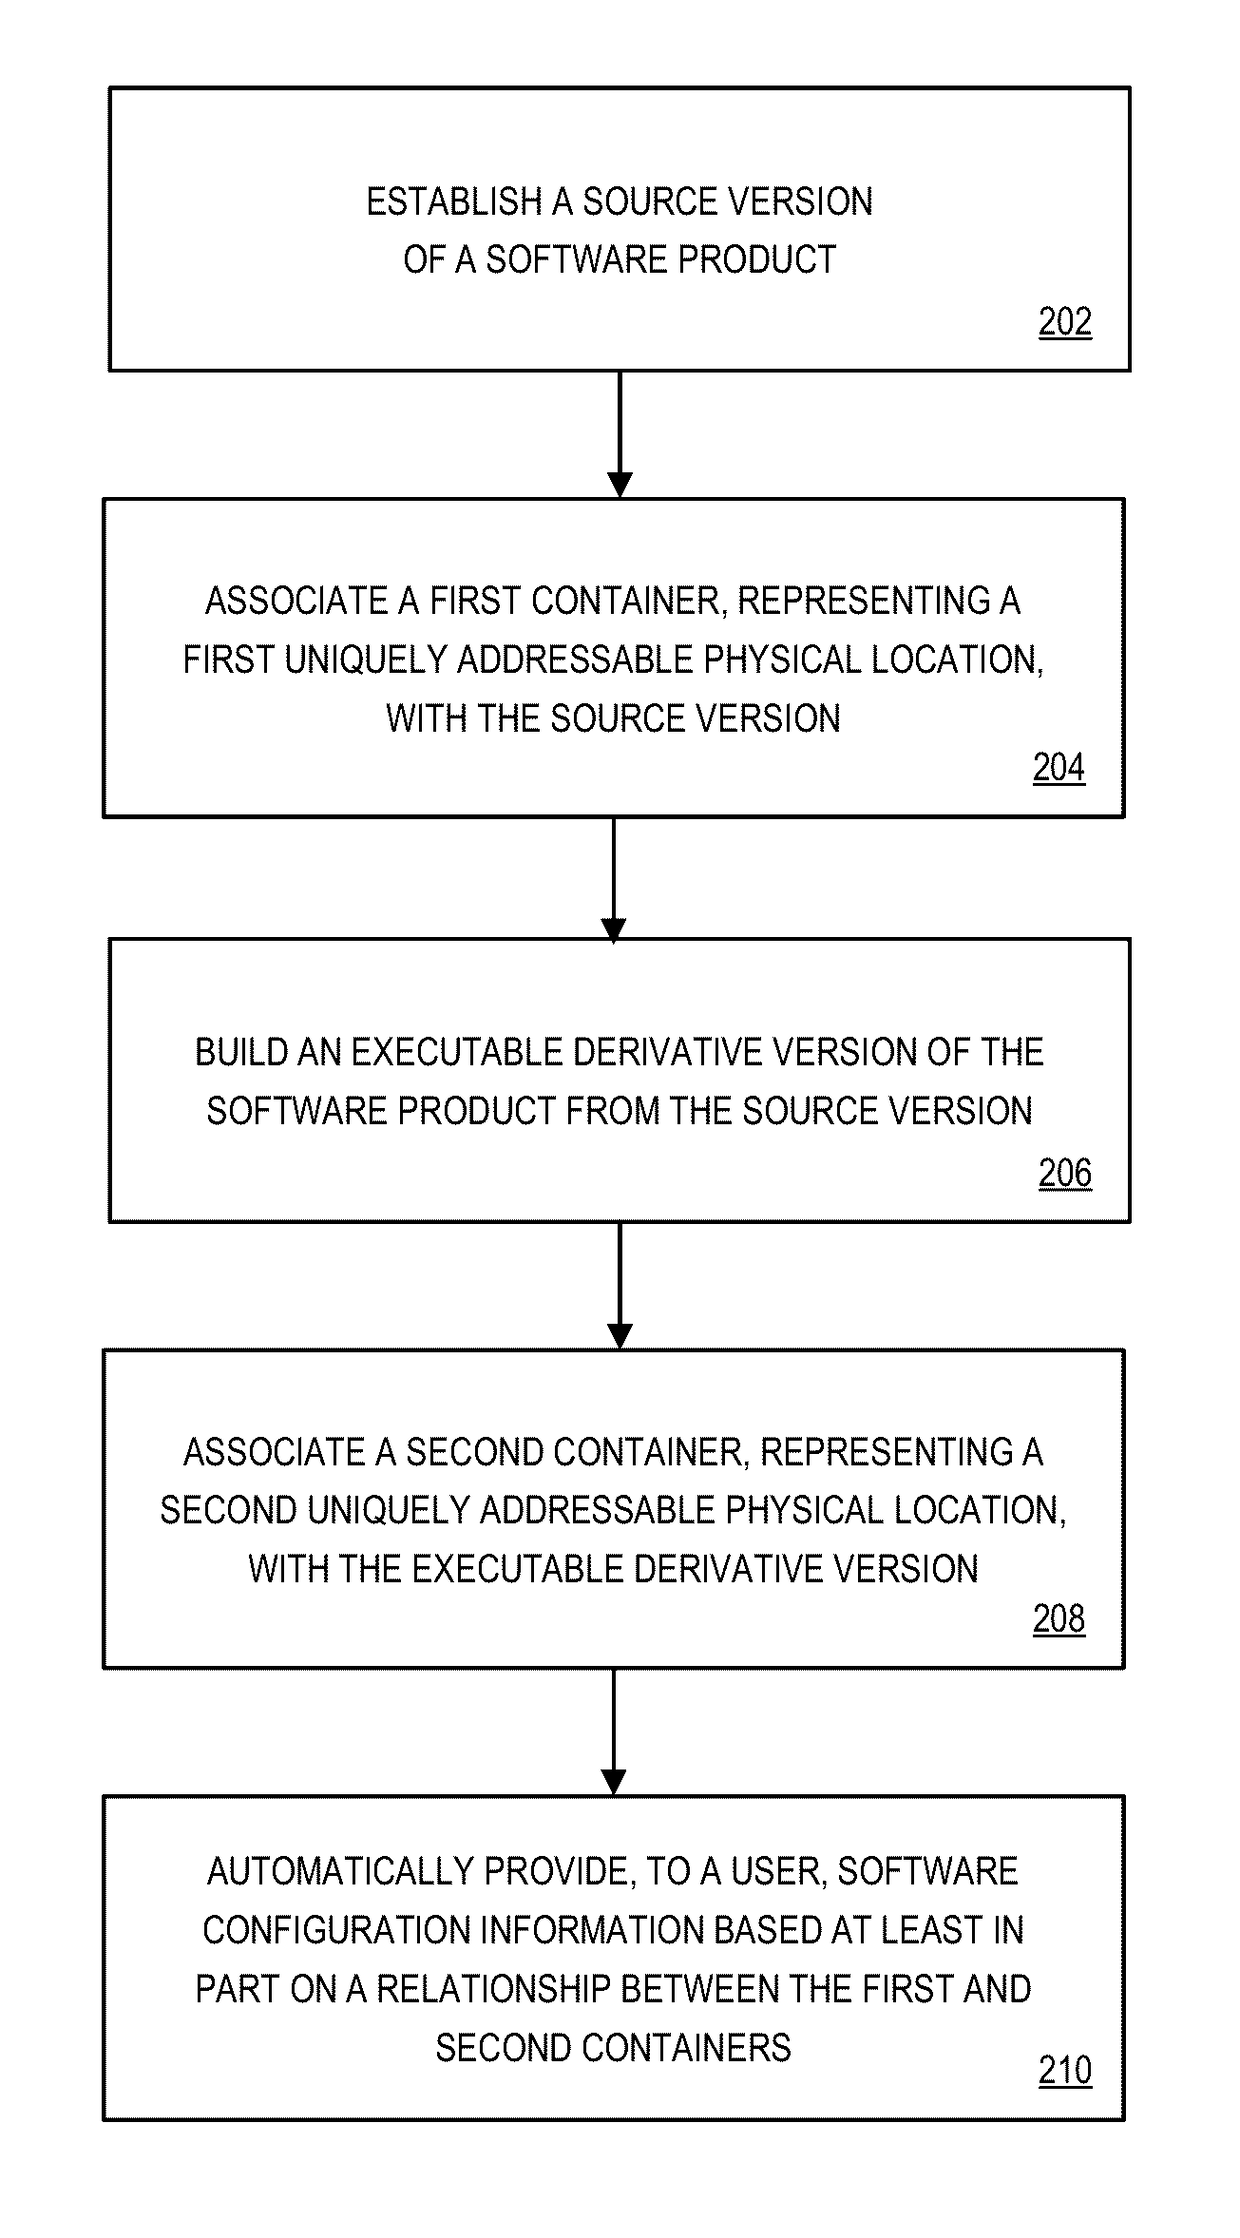 Software configuration control wherein containers are associated with physical storage of software application versions in a software production landscape